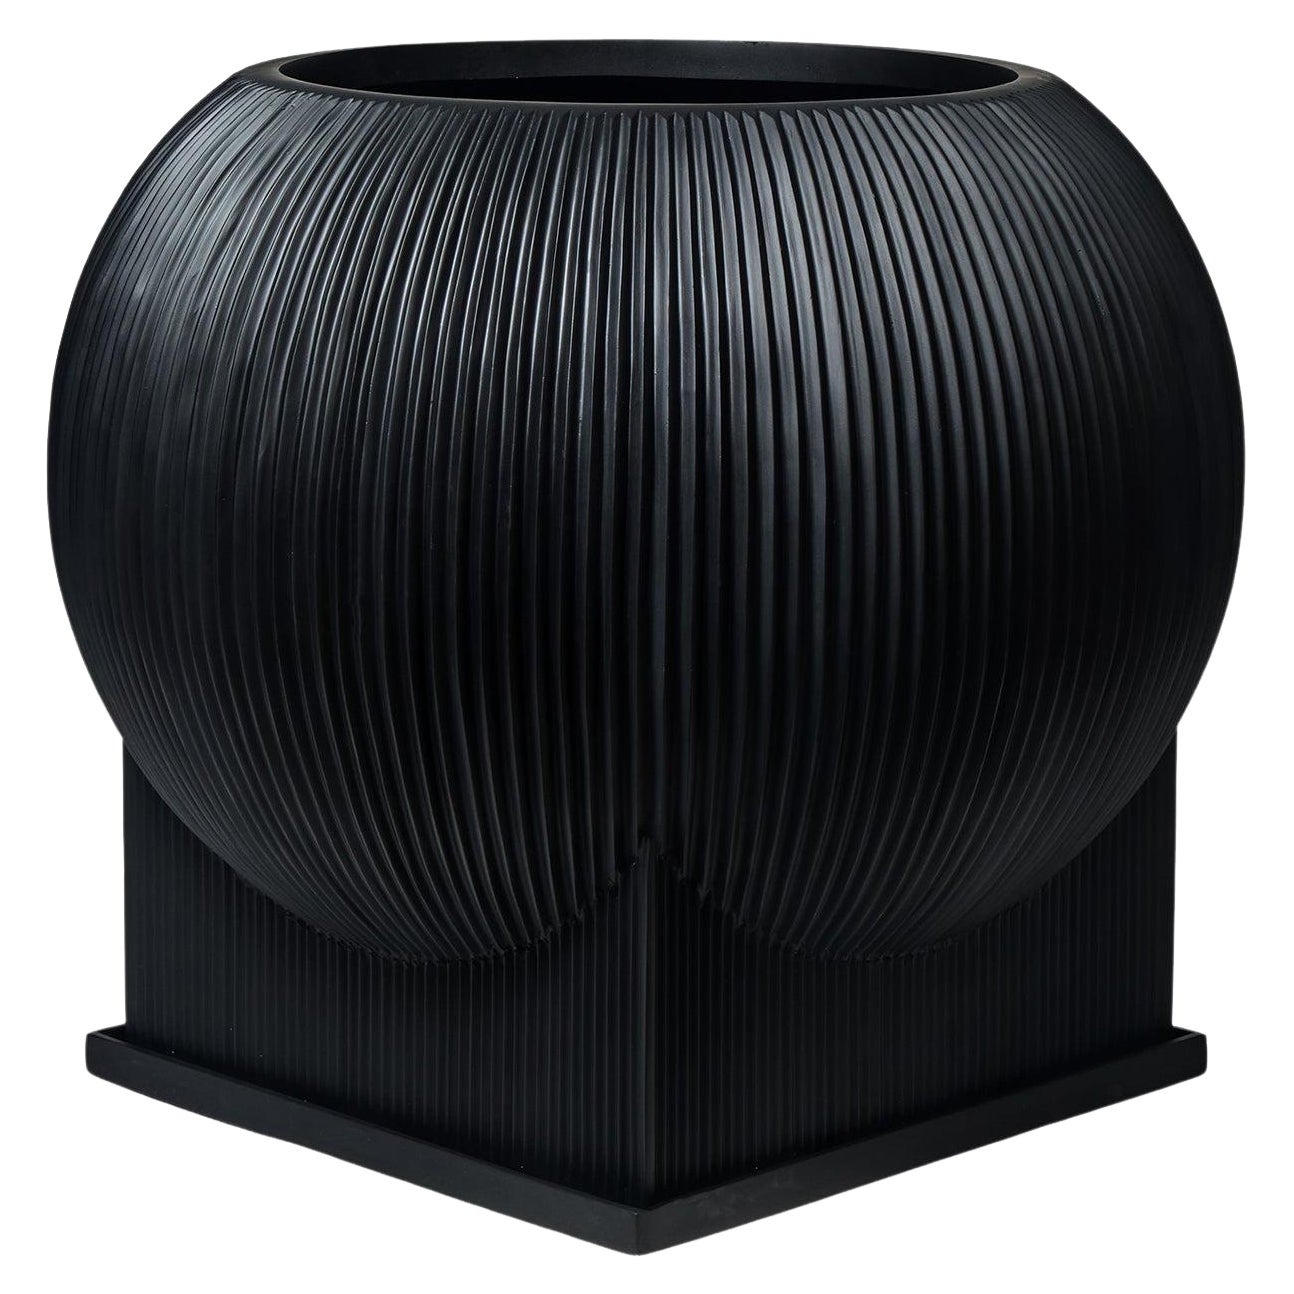 Oversize Flat Blob Planter 'Black' by TFM, Represented by Tuleste Factory